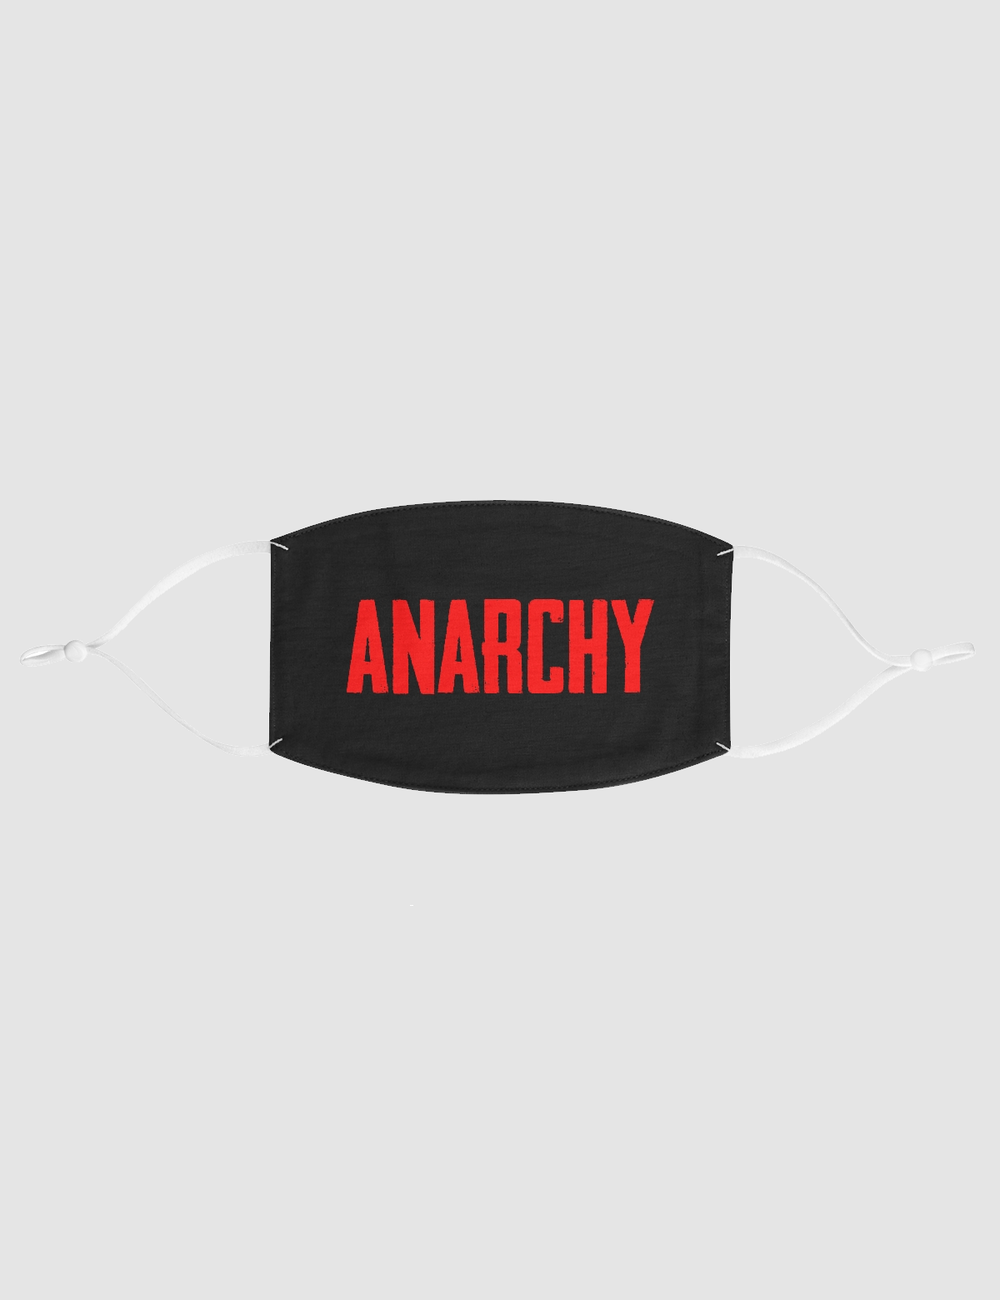 Anarchy | Two-Layer Polyester Fabric Face Mask OniTakai